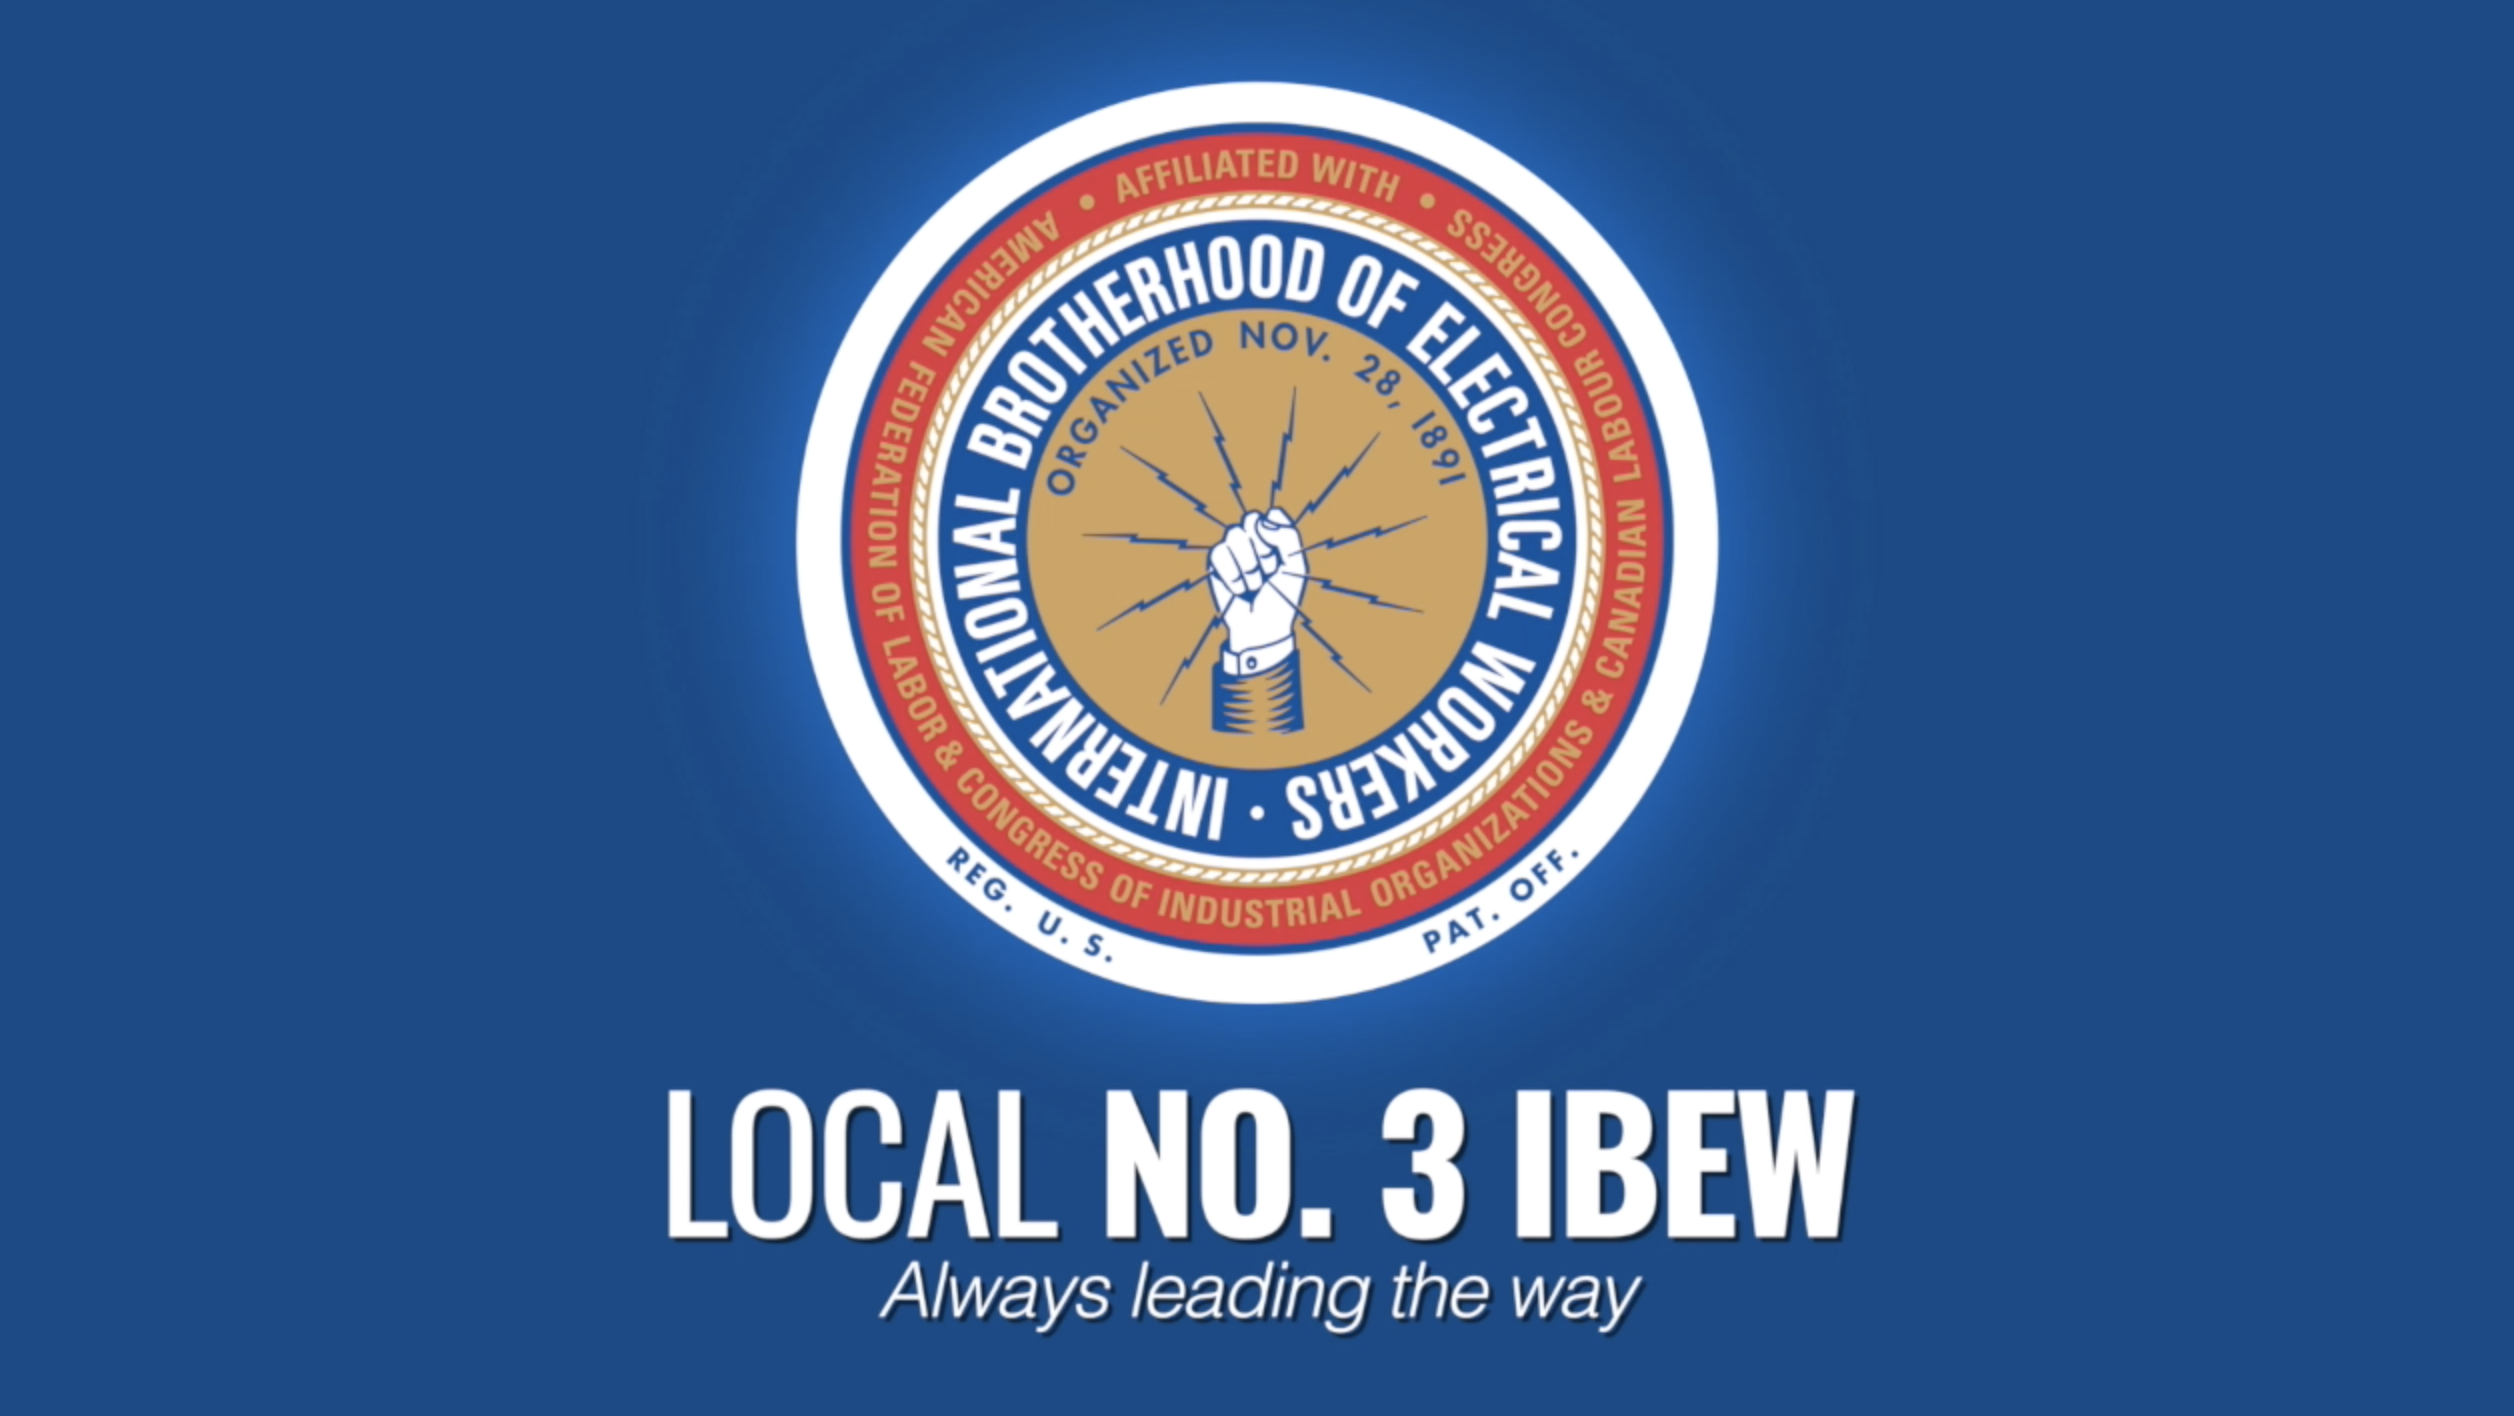 Special Update On COVID 19 Outbreak Response Local Union No 3 IBEW